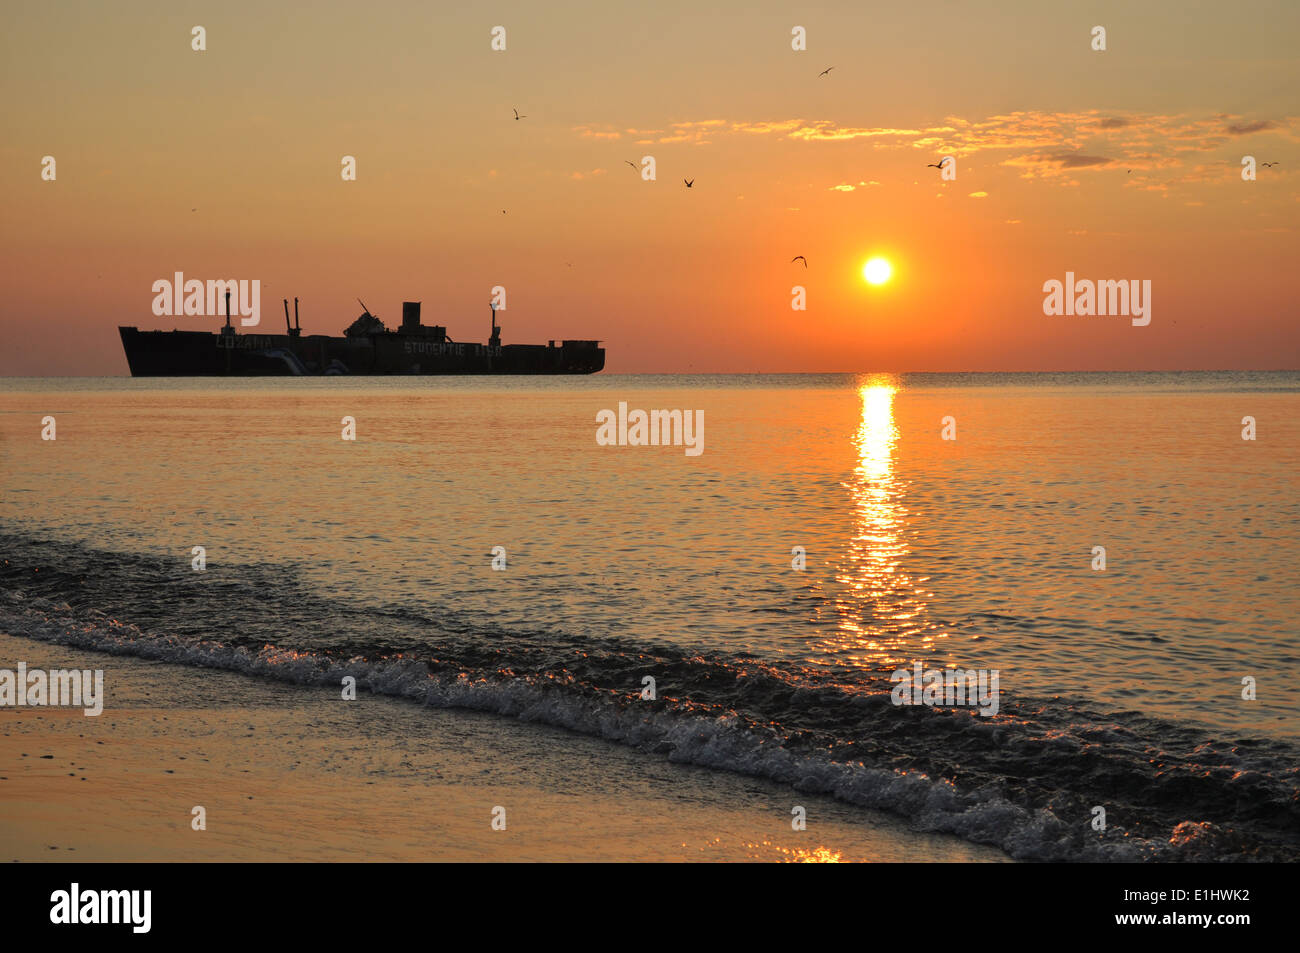 sunrise with a ship, crock silhouette Stock Photo